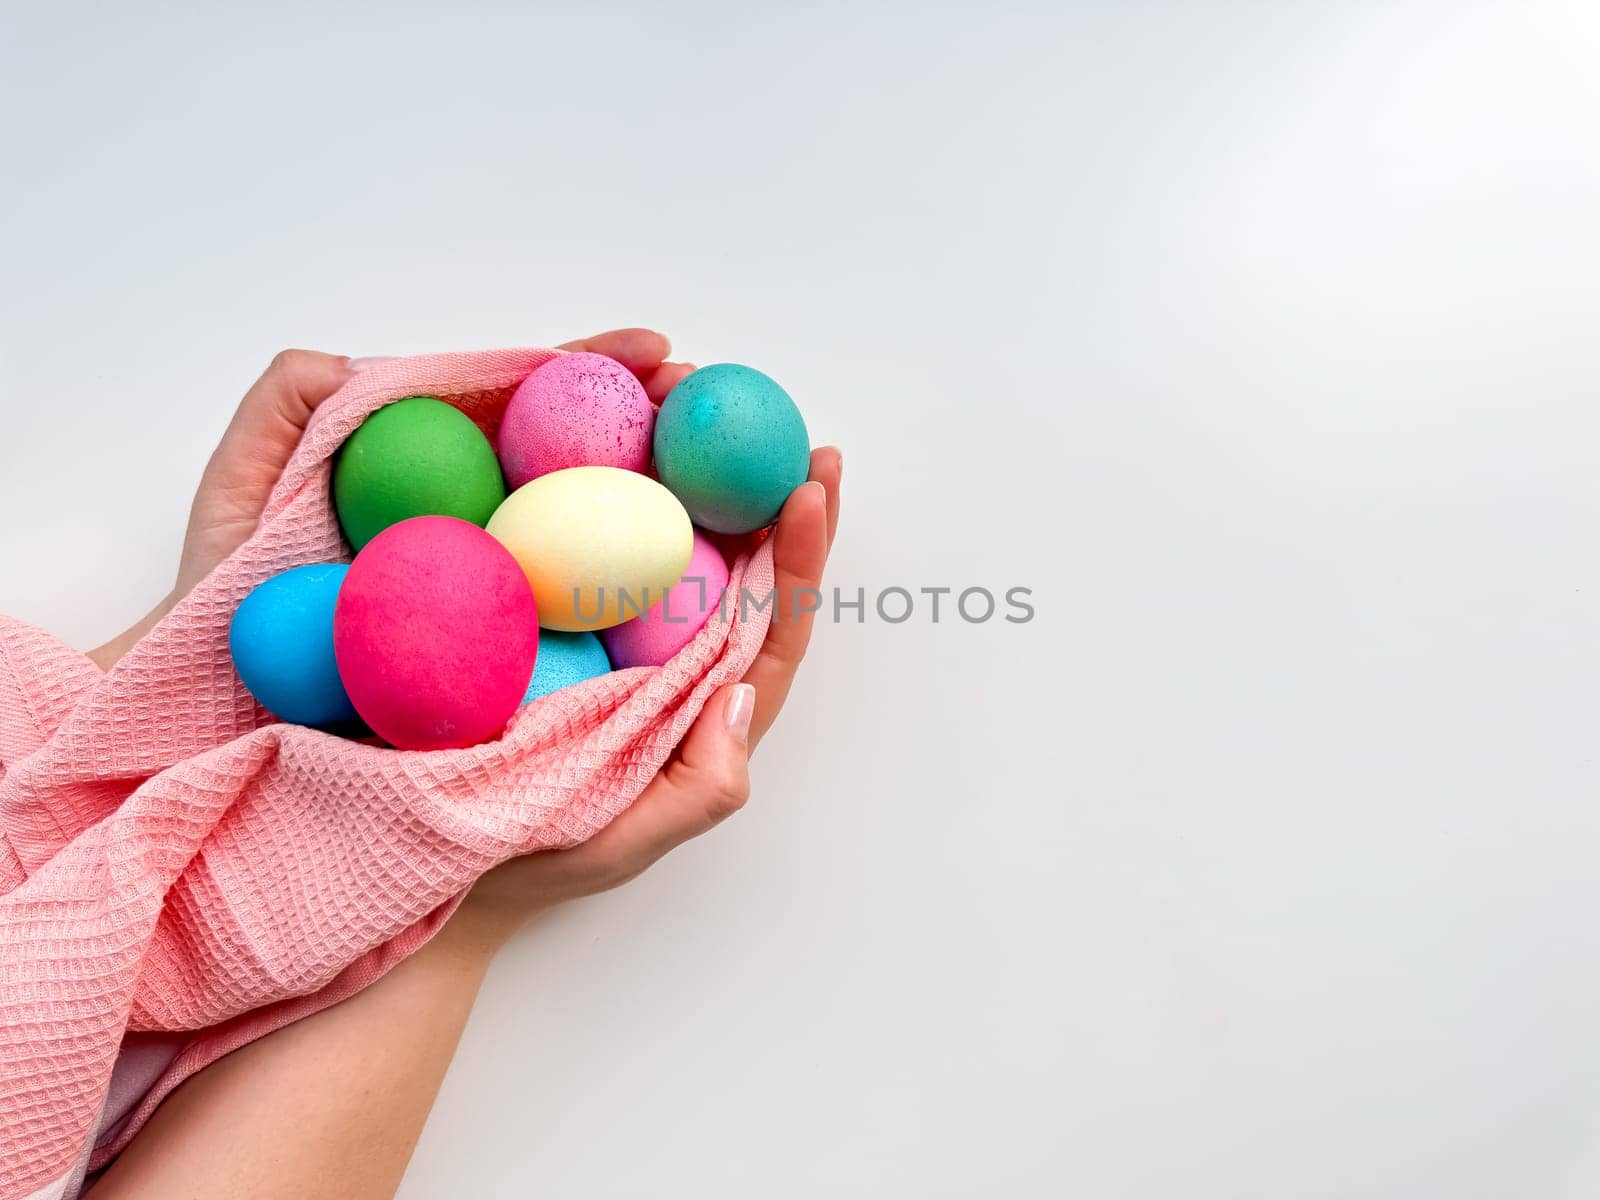 Hands tenderly hold variety of colorful Easter eggs wrapped in soft pink fabric on white background with empty space for text. Suitable for seasonal celebrations and festive spring looks. by Lunnica